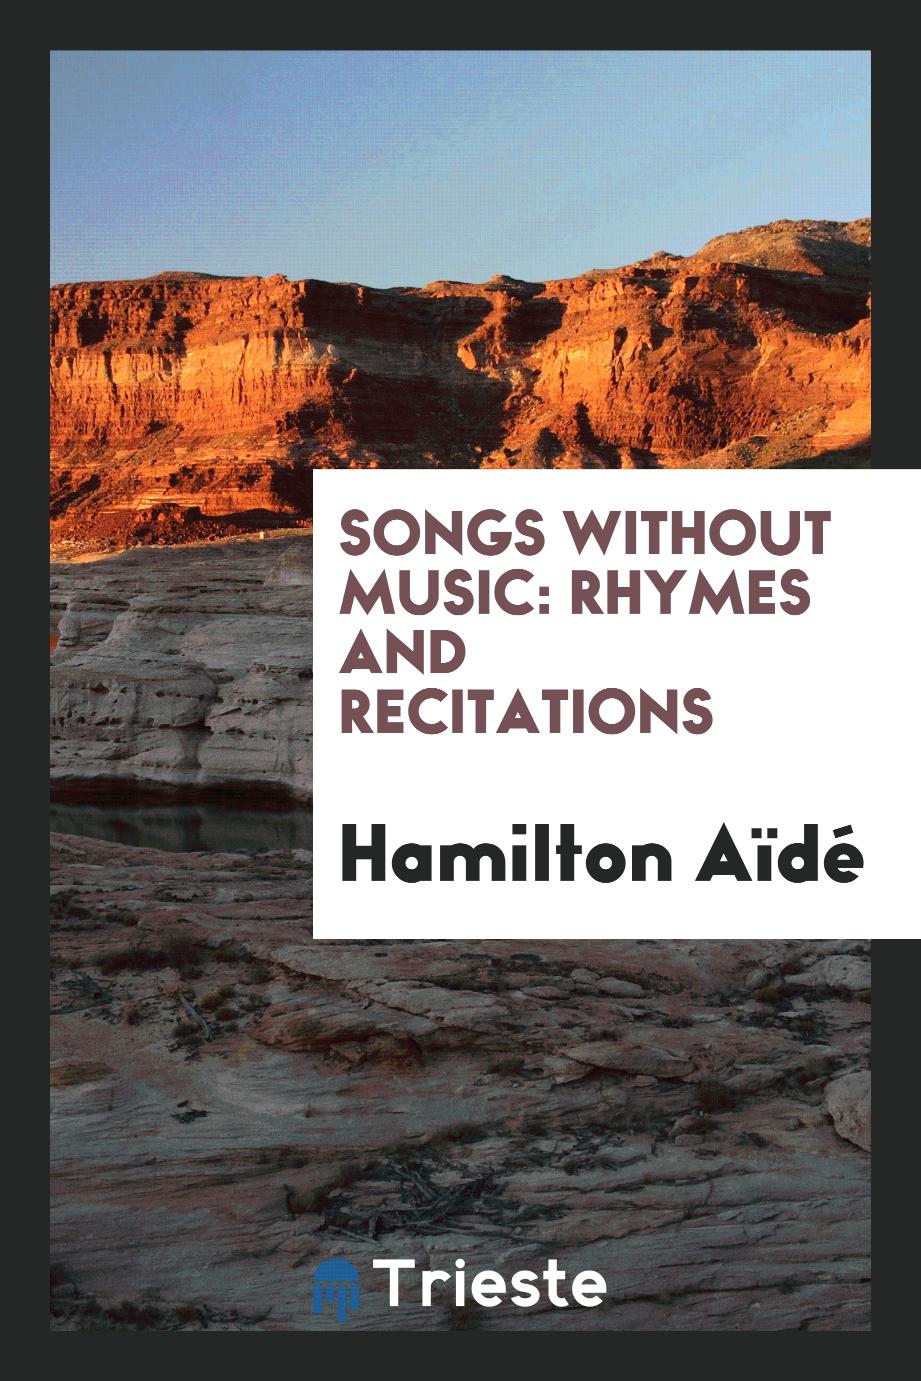 Songs Without Music: Rhymes and Recitations